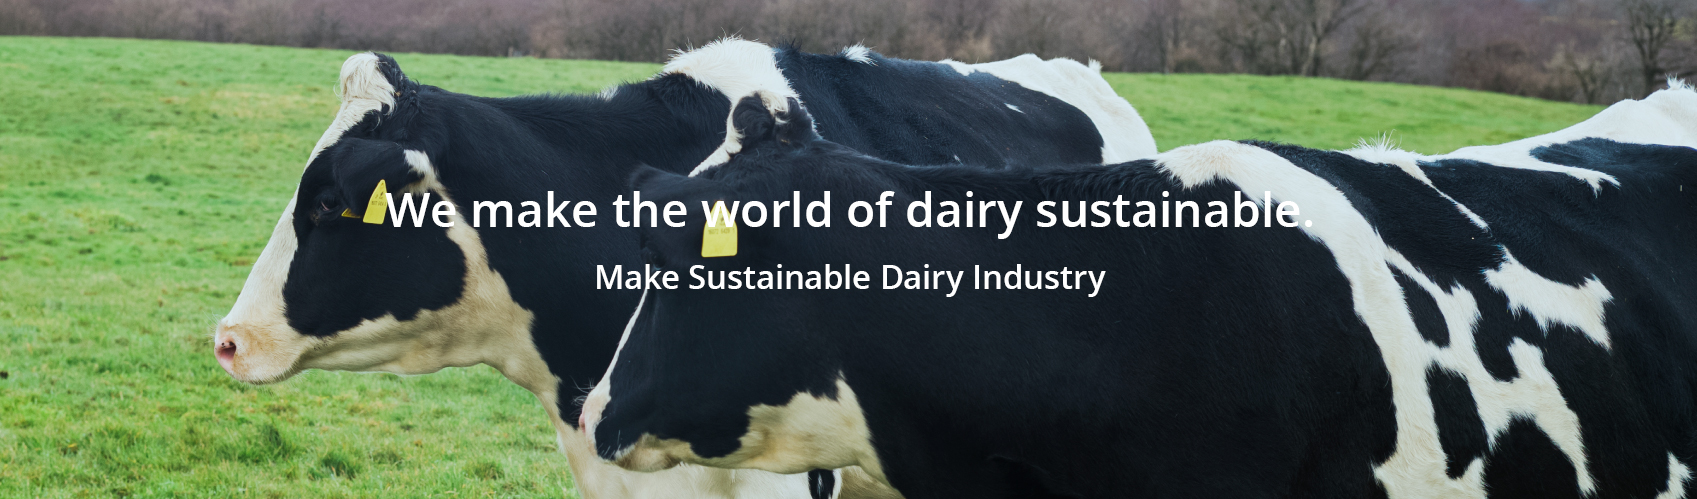 We make the world of dairy sustainable. Make Sustainable Dairy Industry